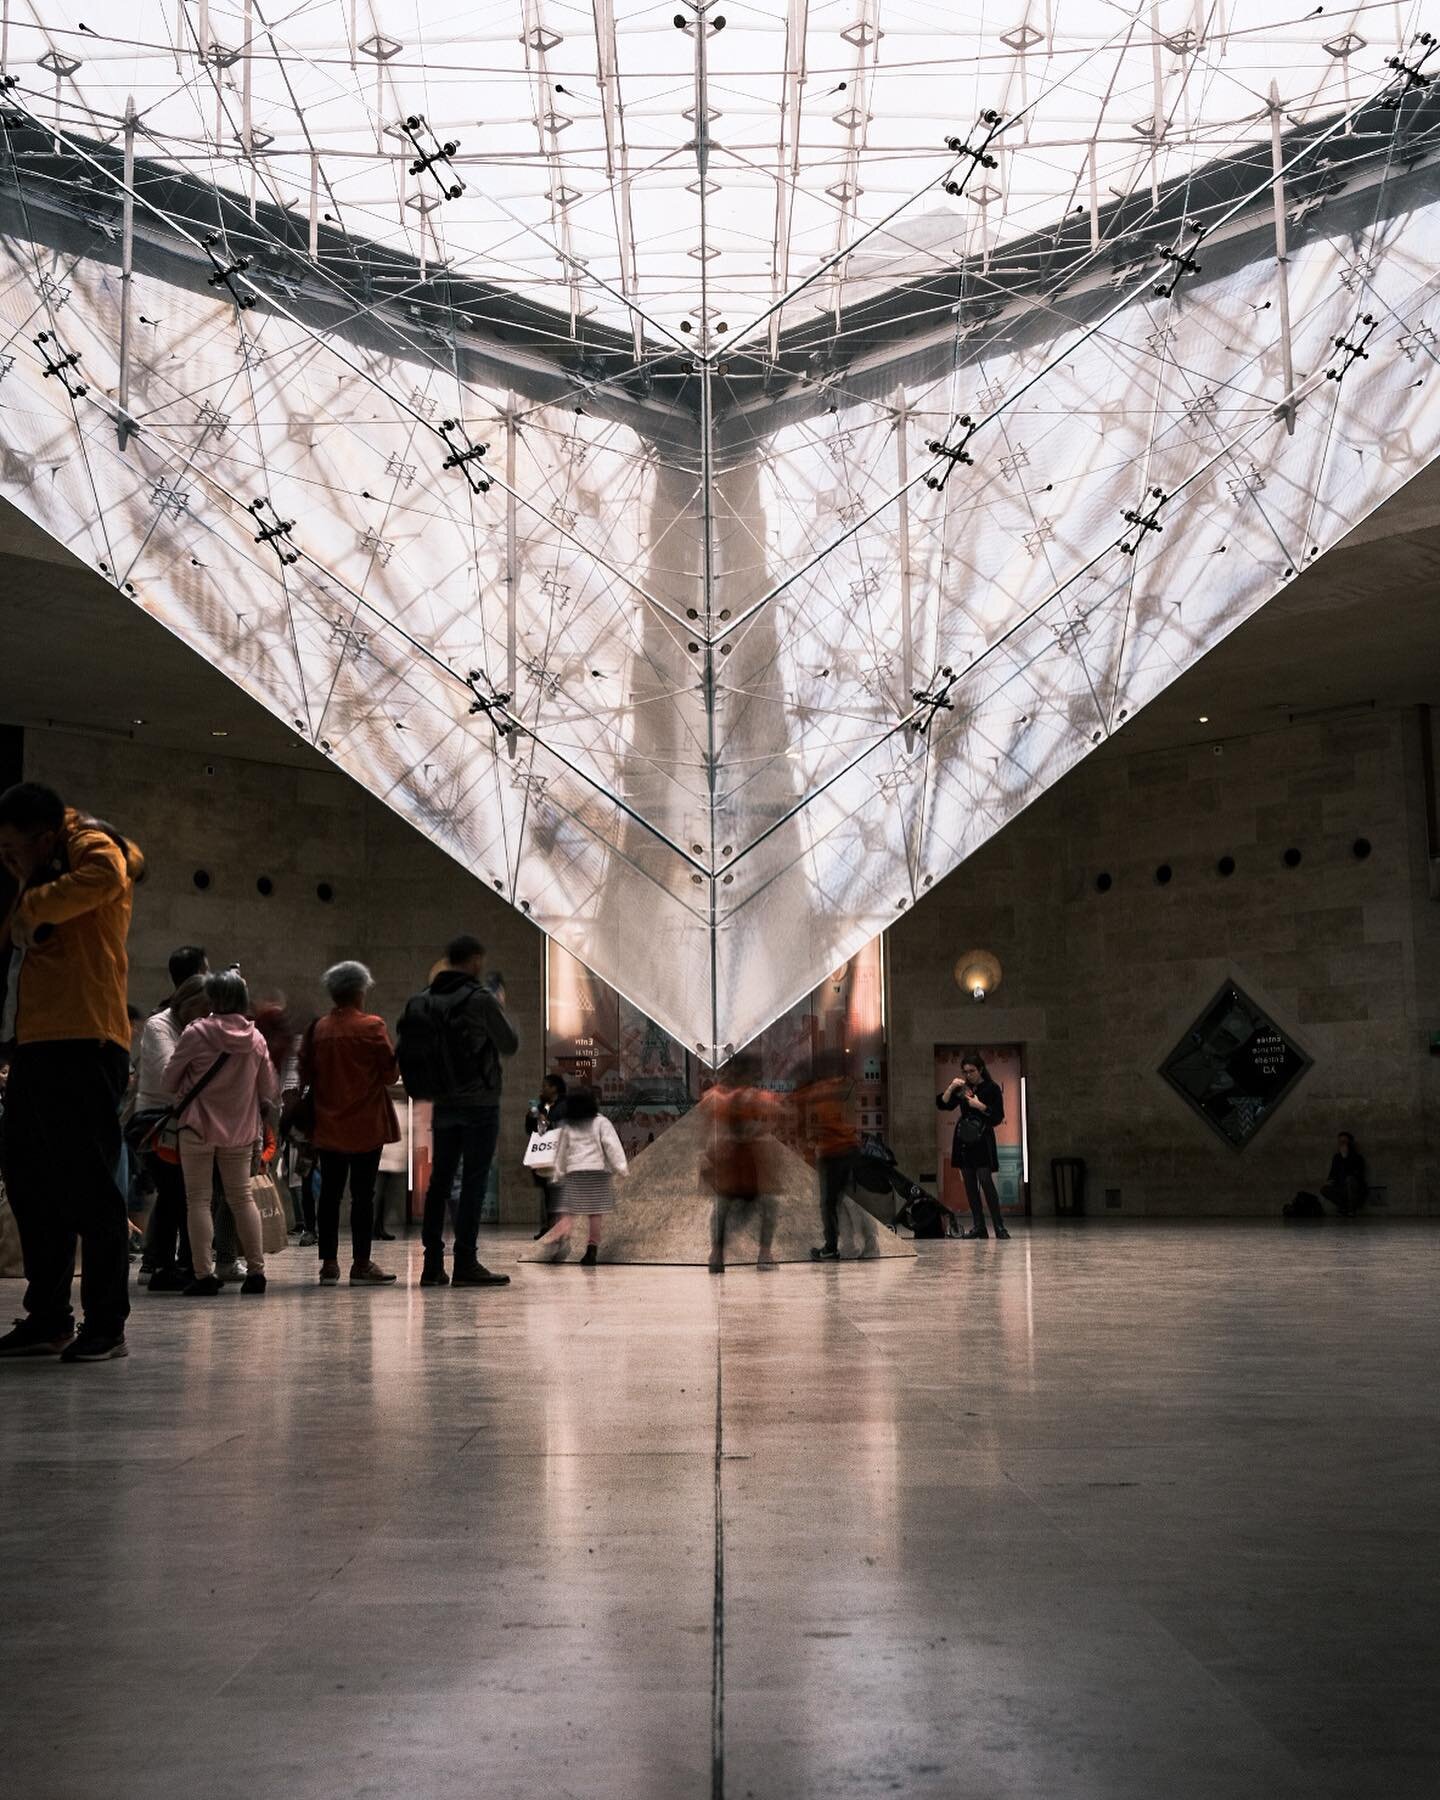 The Louvre is impressive in person. This upside down pyramid is part of 3 larger pyramids that are above ground. I will say this place was extremely crowded with kids jumping on the center stone. I lowered the shutter speed to 1 second here and the k